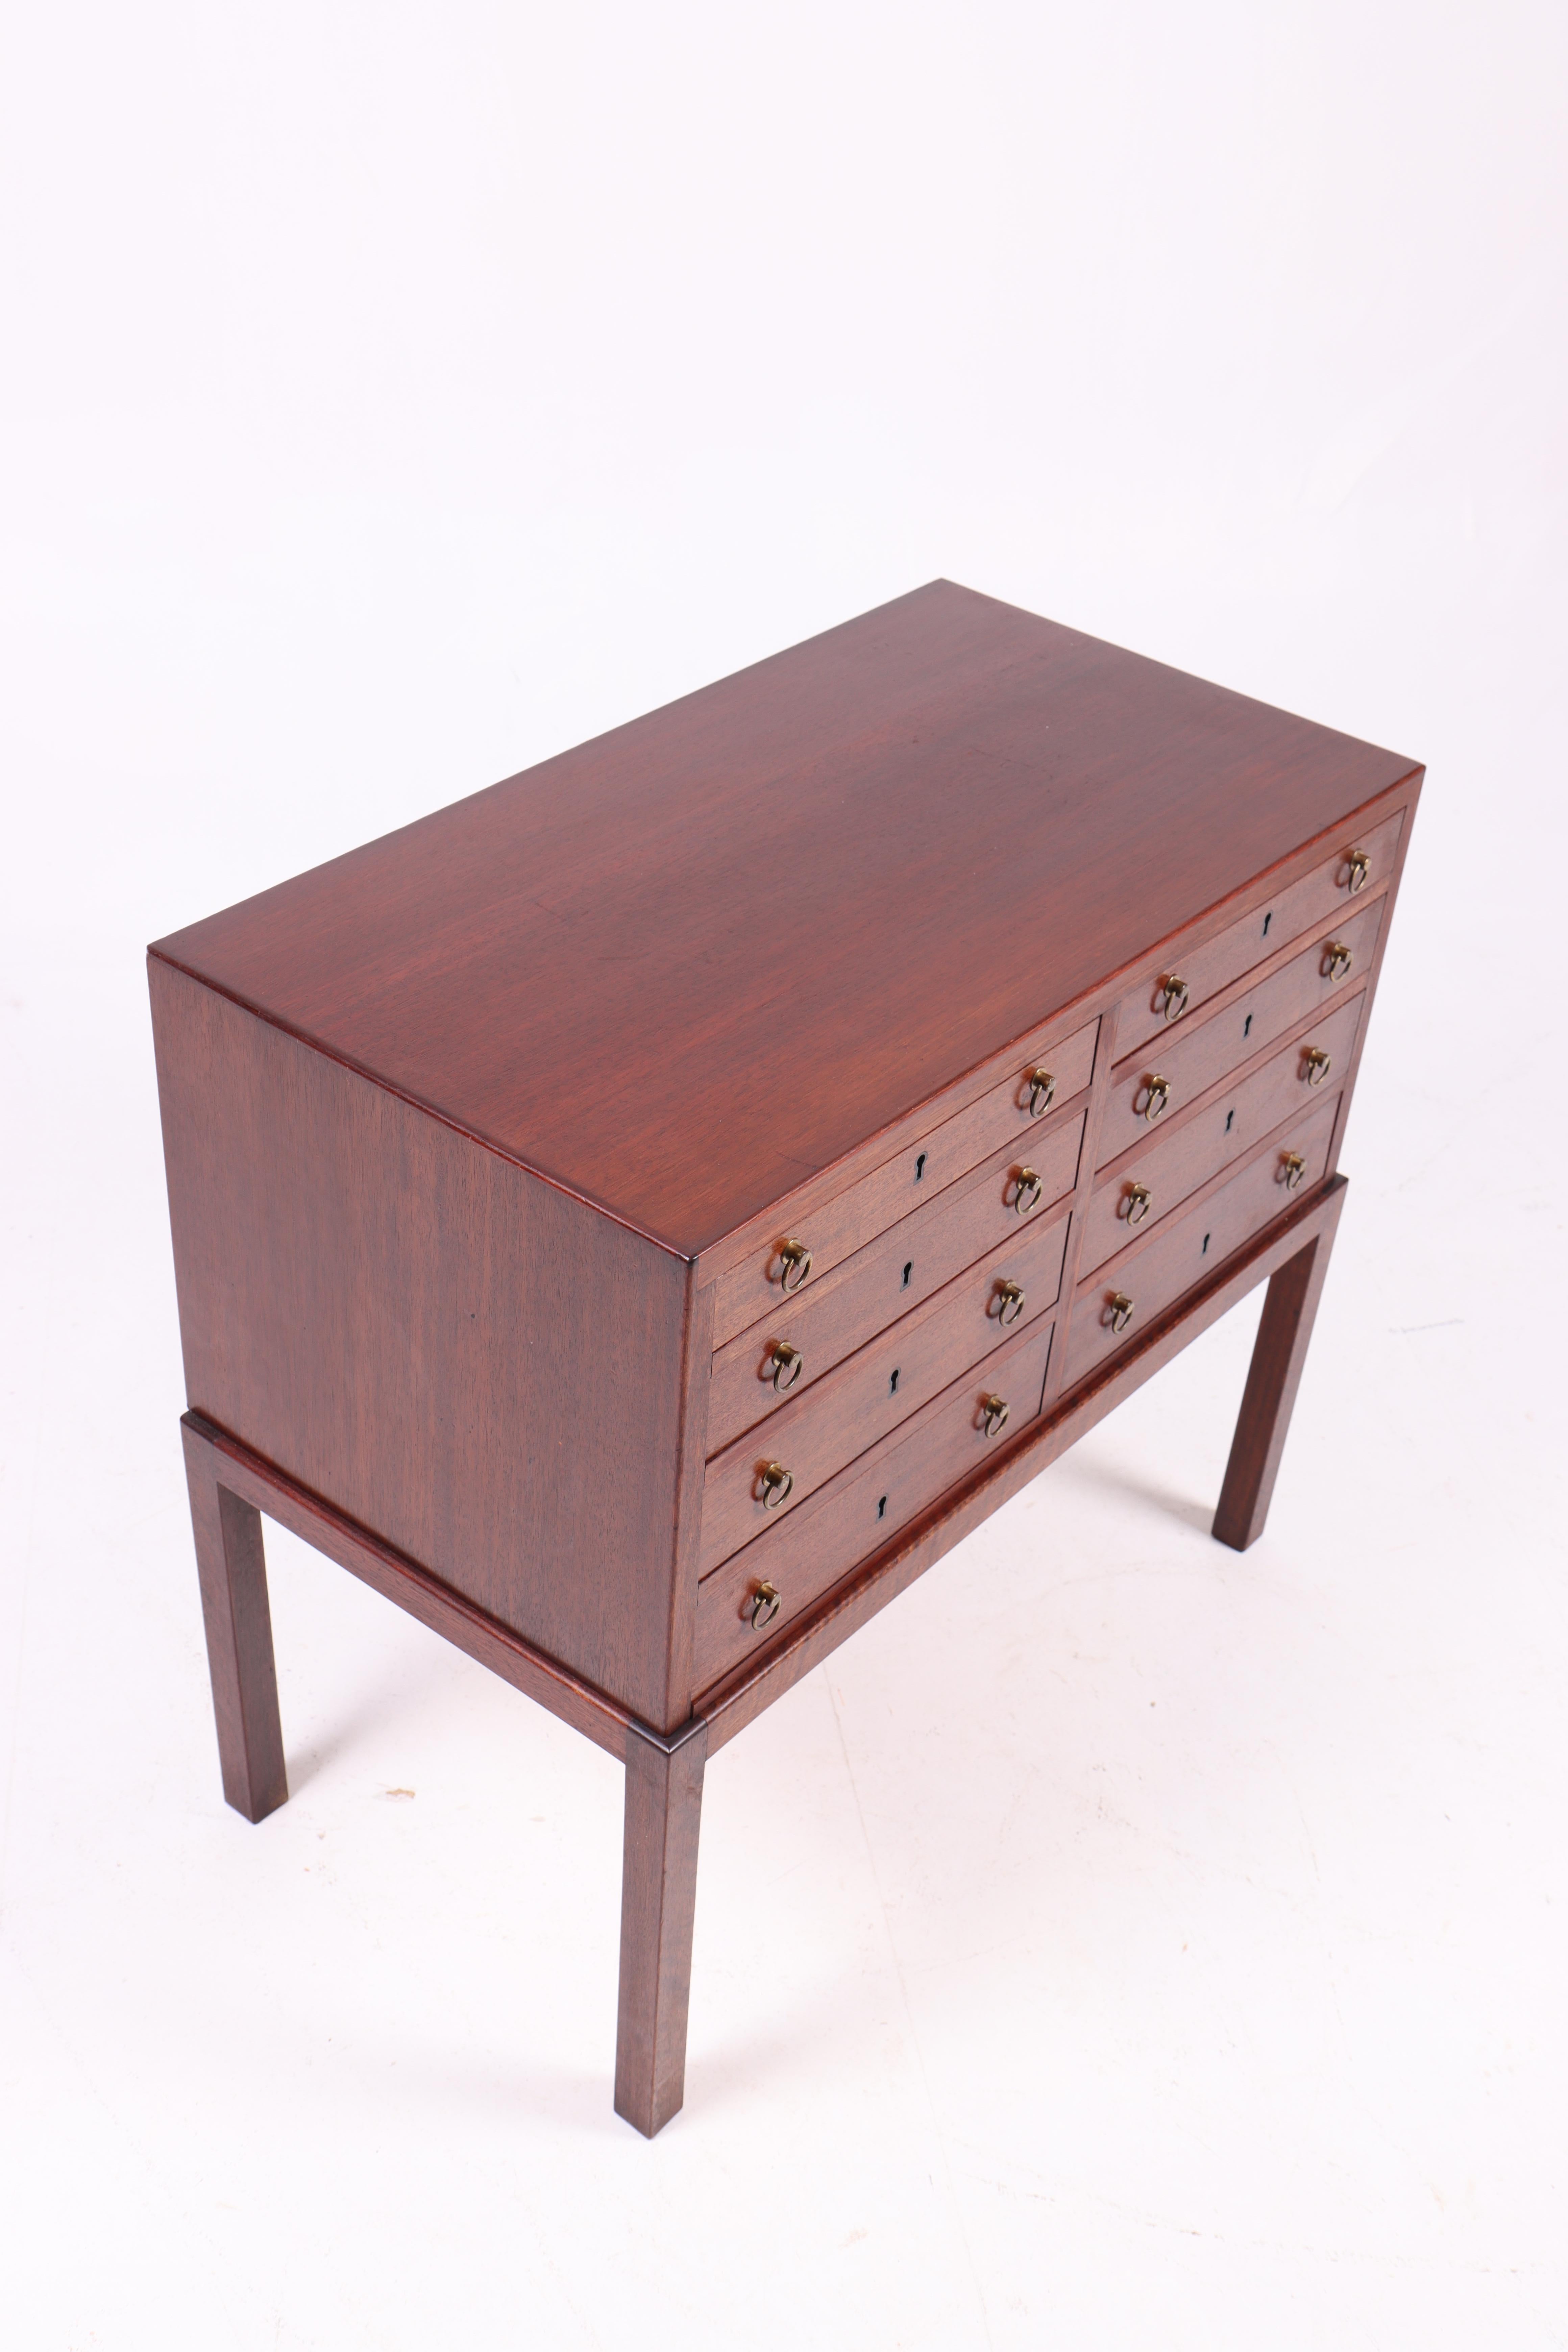 Brass Midcentury Cabinet in Mahogany, 1950s For Sale